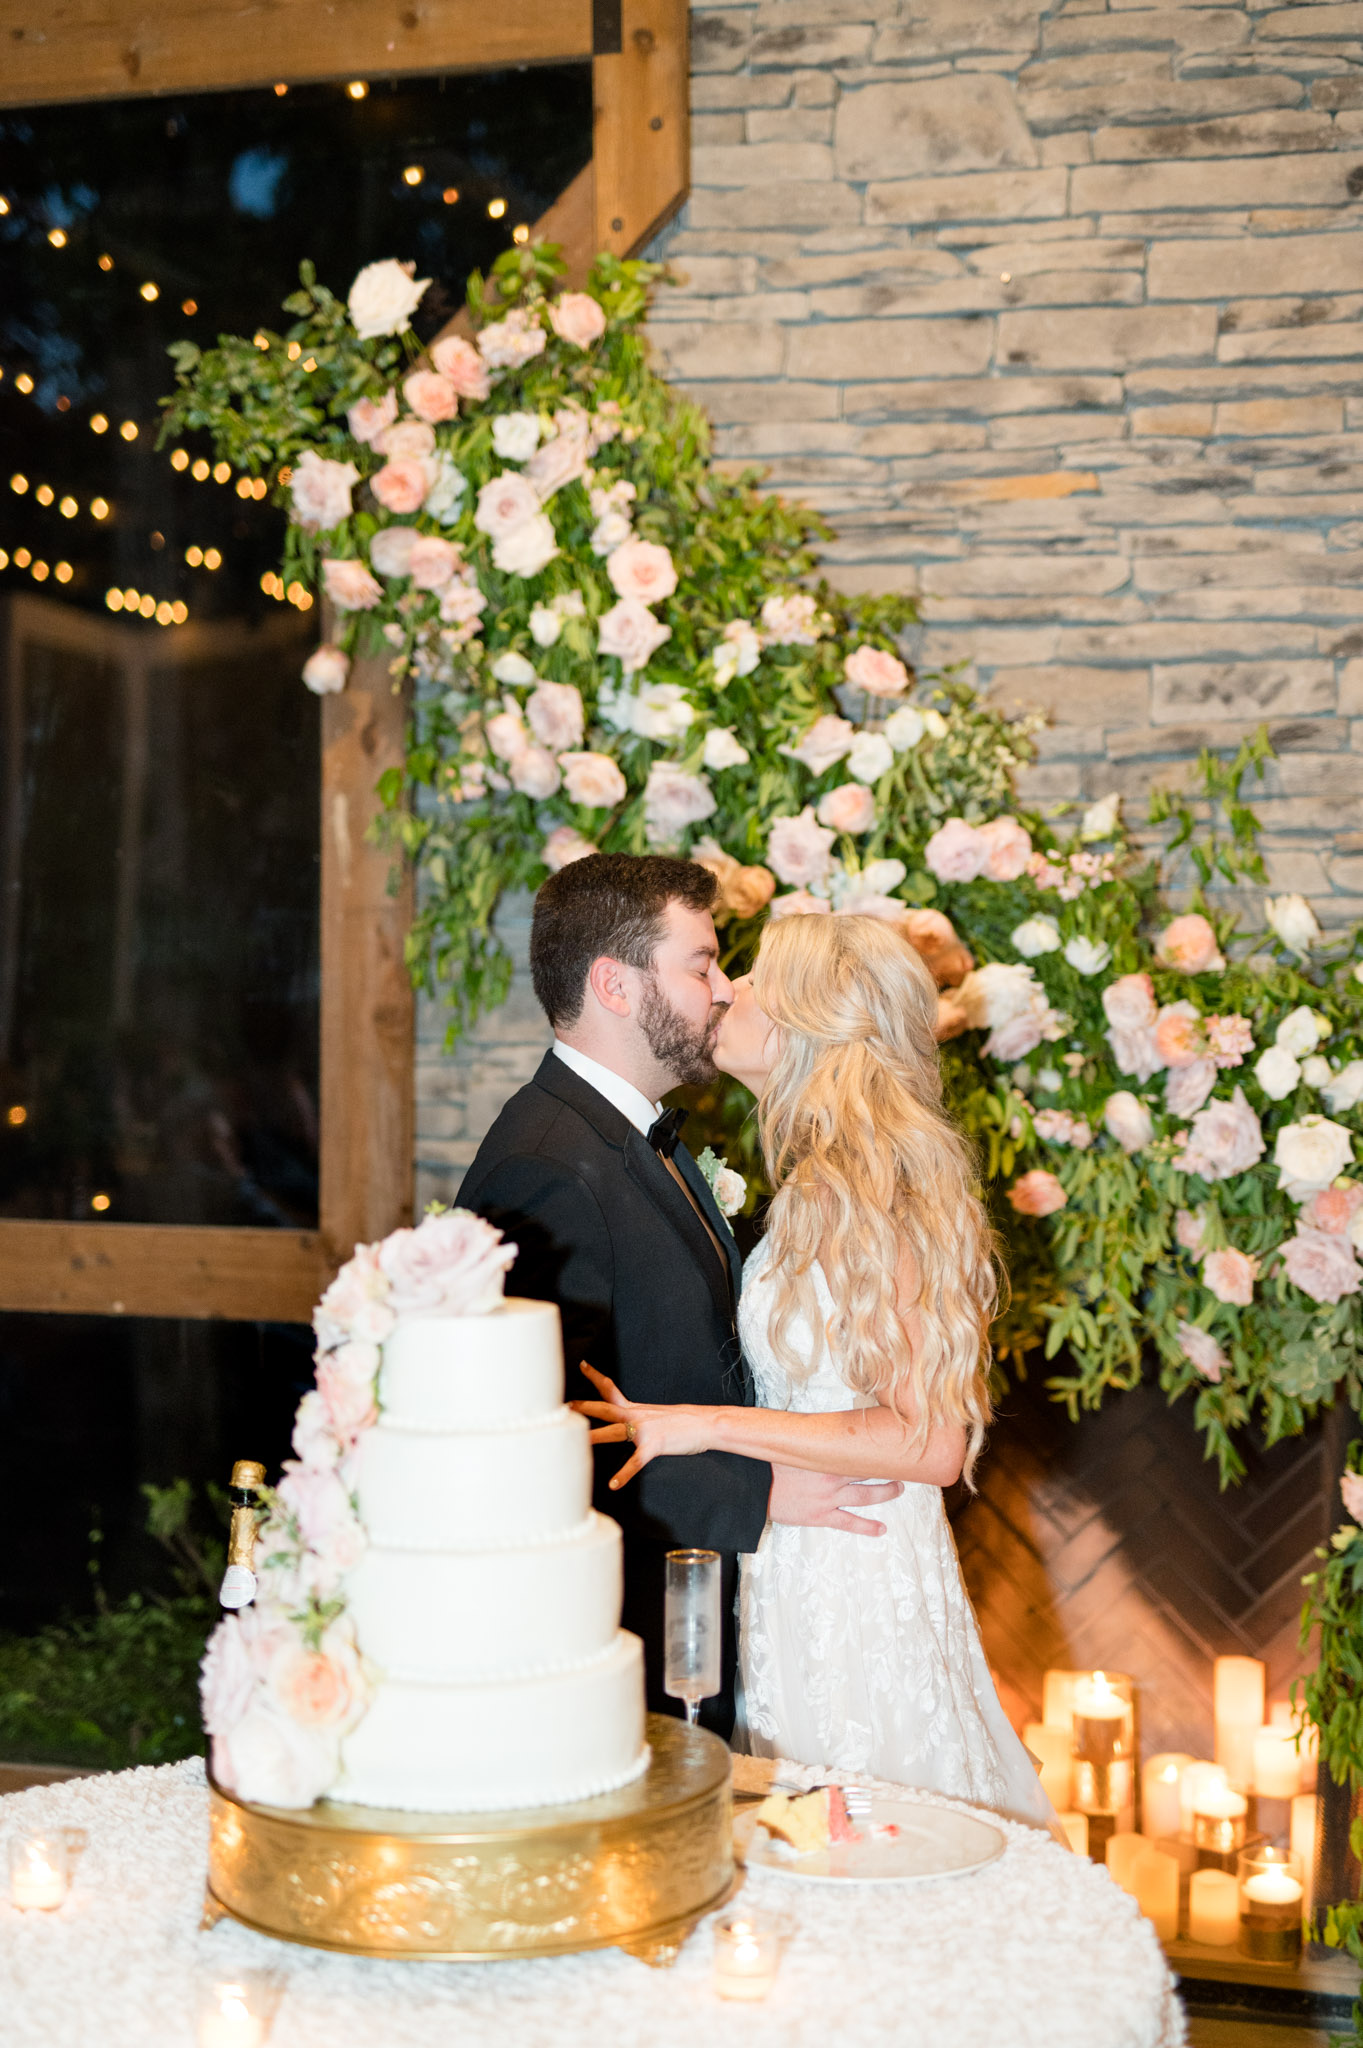 Bride and groom kiss after cutting cake.